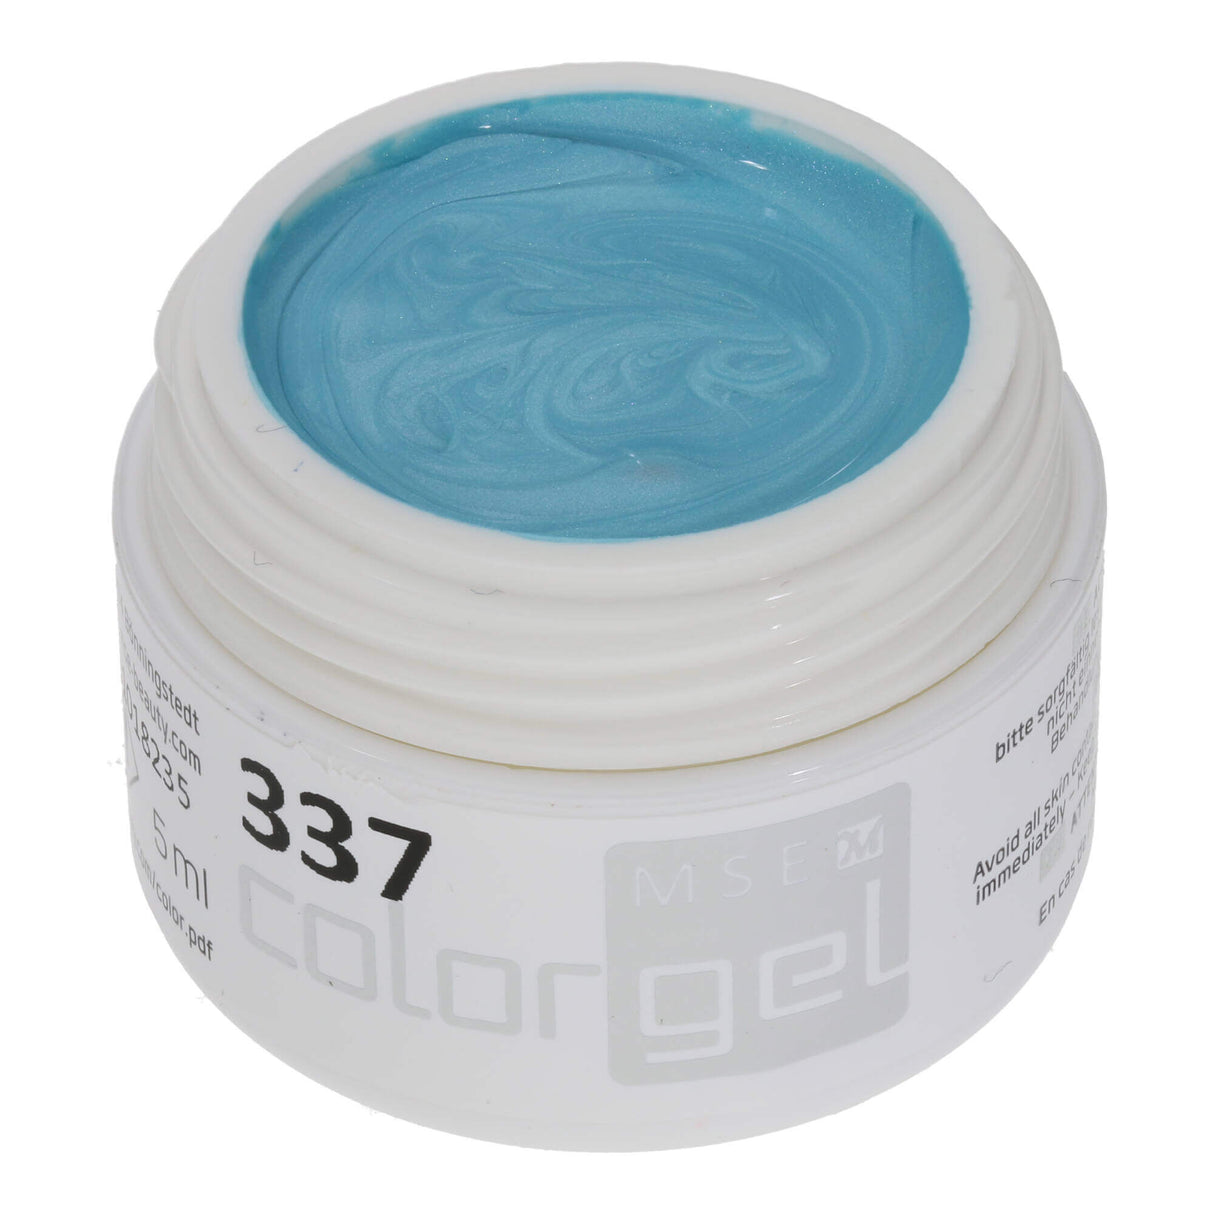 # 337 Premium EFFECT Color Gel 5ml Light turquoise with a delicate pearlescent sheen